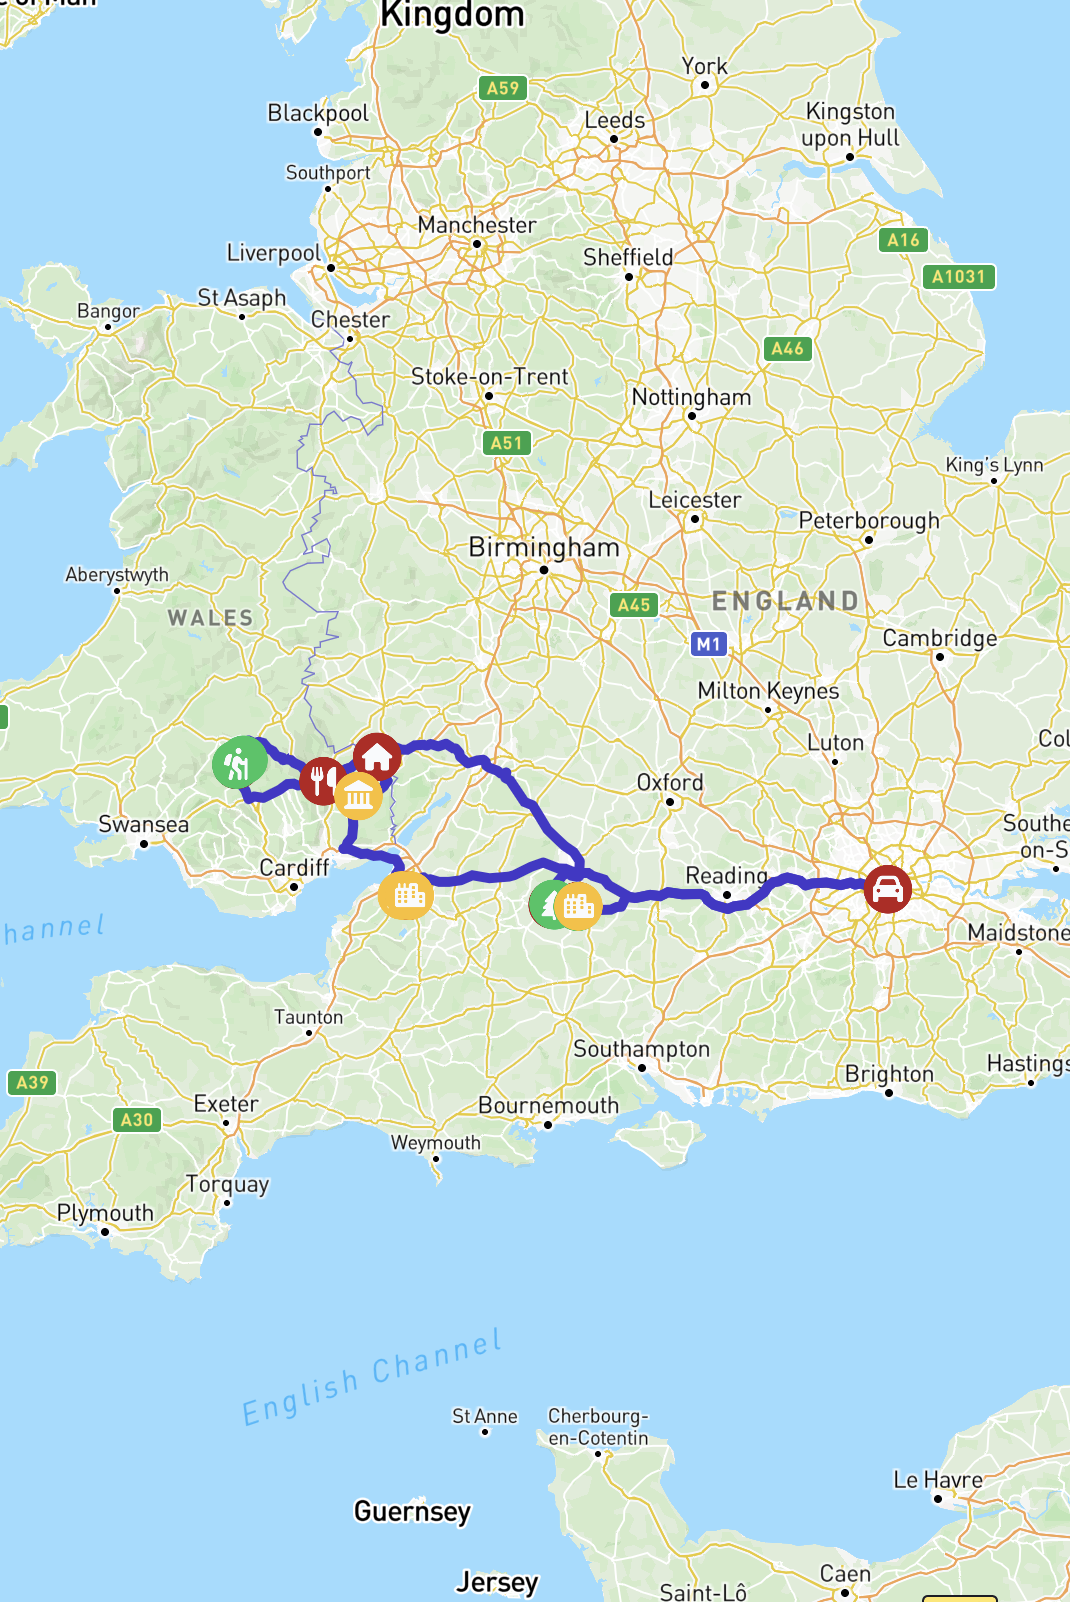 A map showing the route from London to Wales.